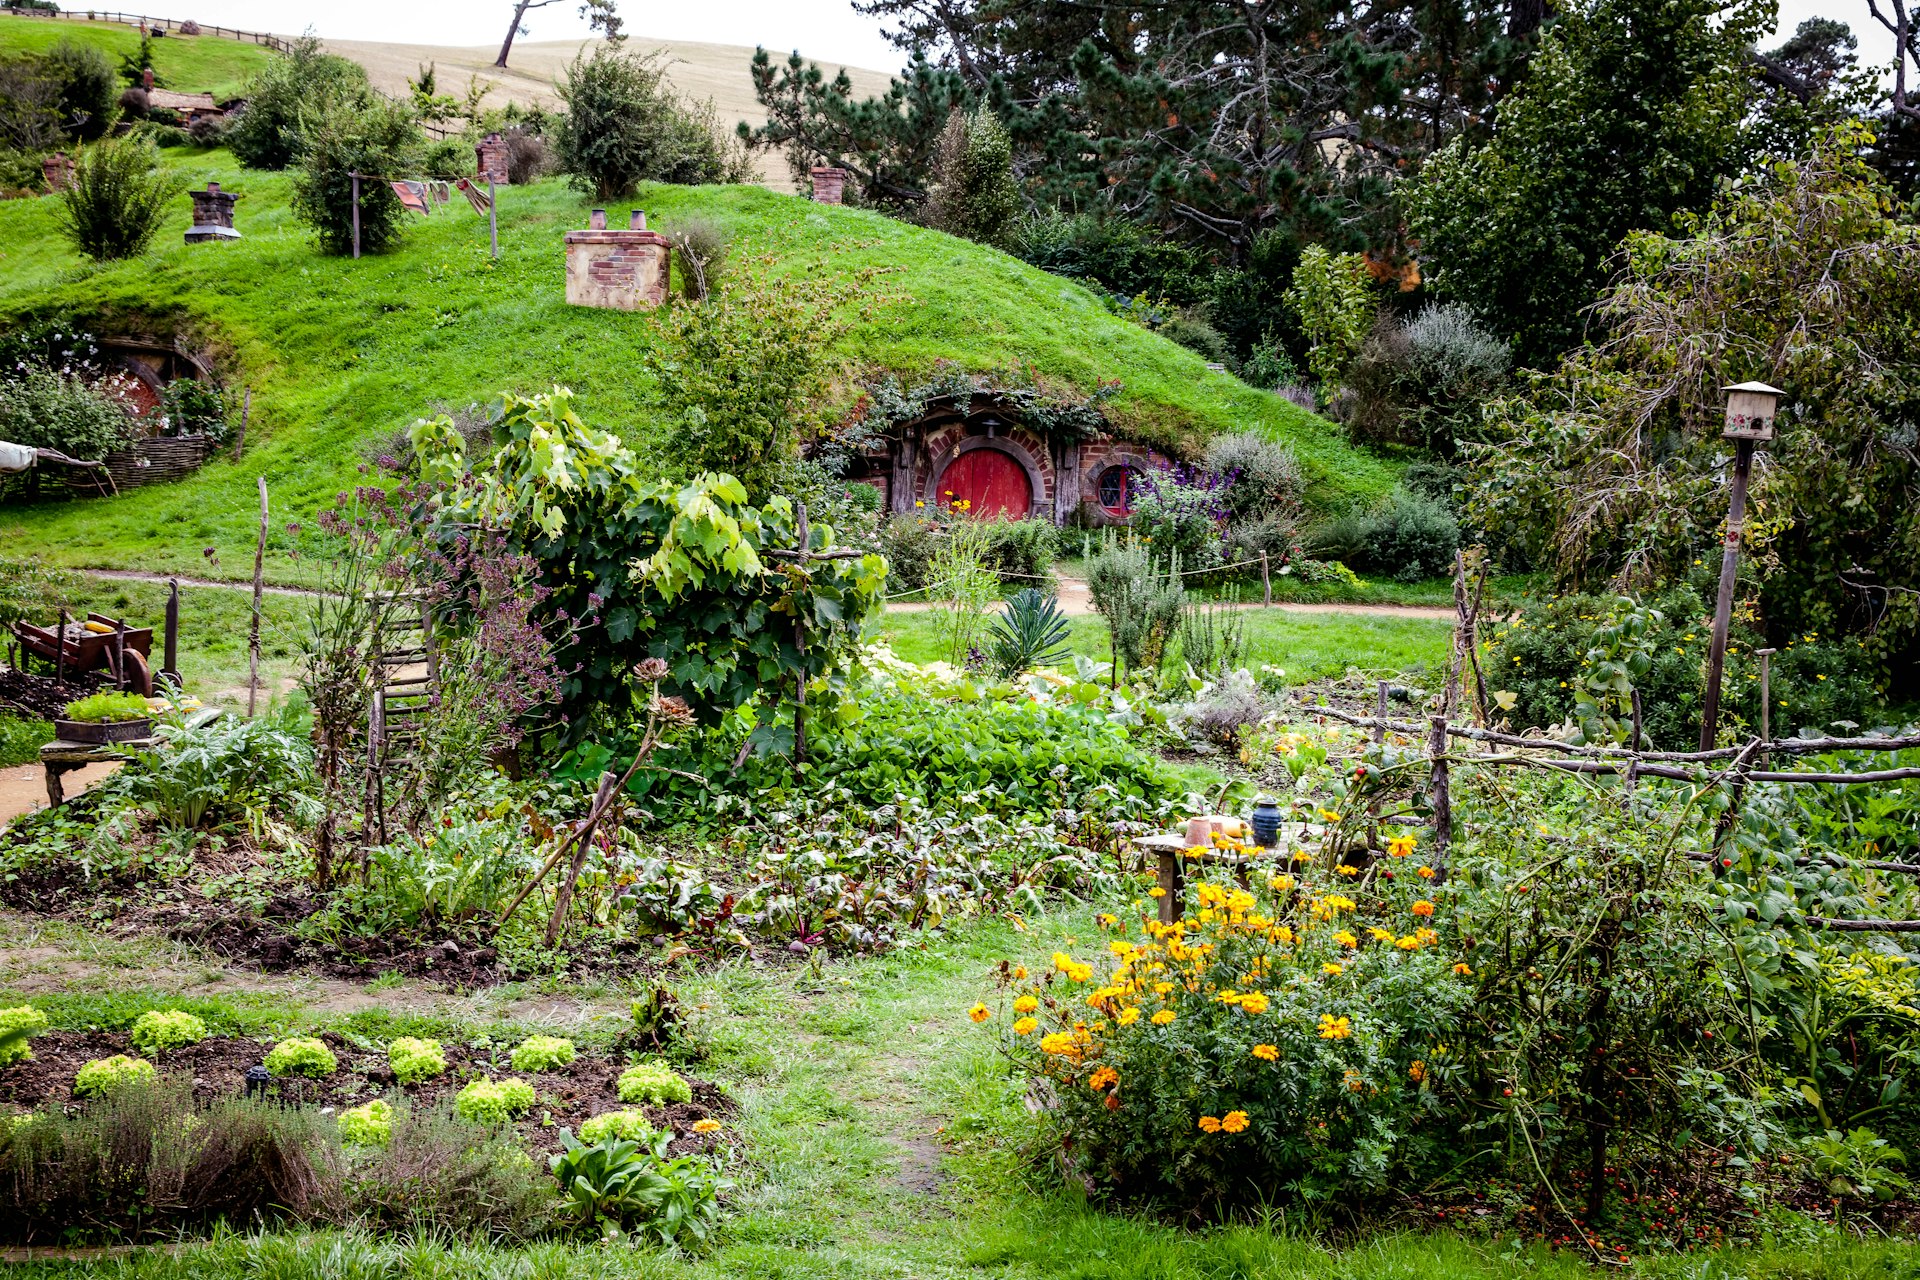 A small hobbit house is built into a green hill in Hobbiton in Matamata, New Zealand 